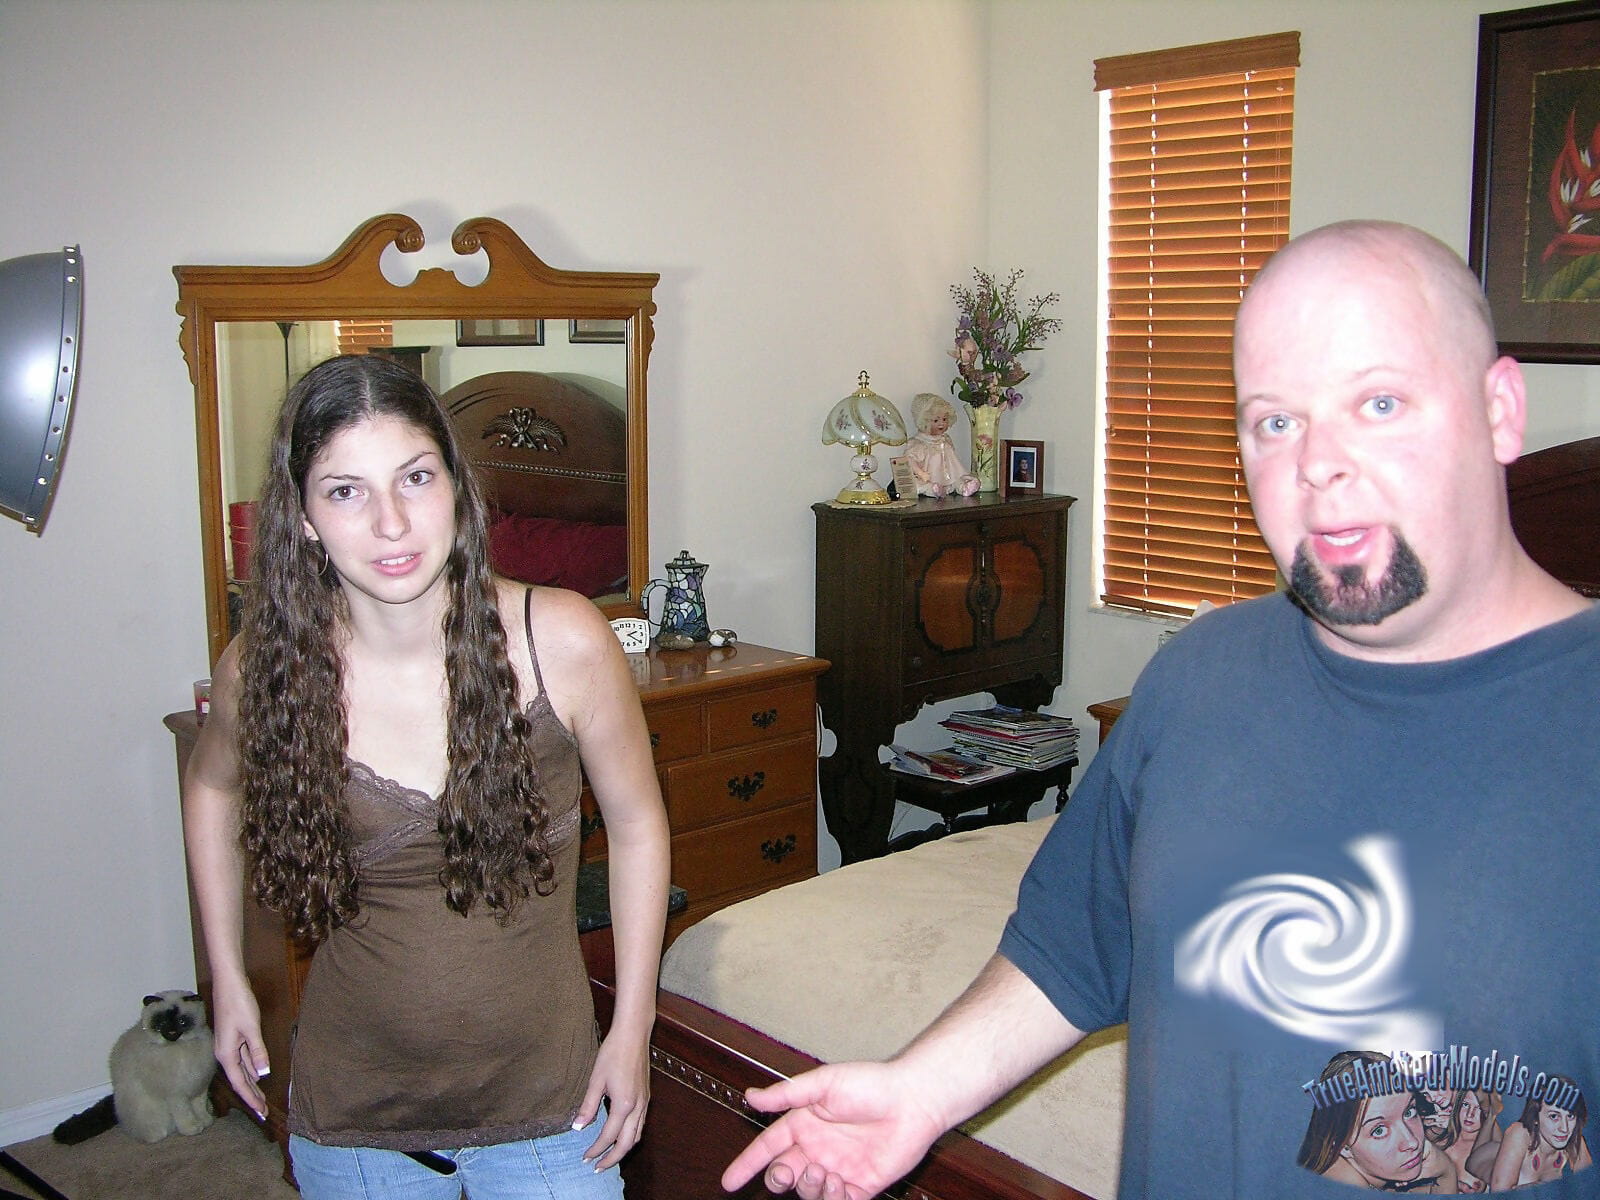 Fat and hairy skinhead dude bangs a young looking teen girl - part 3691 page 1